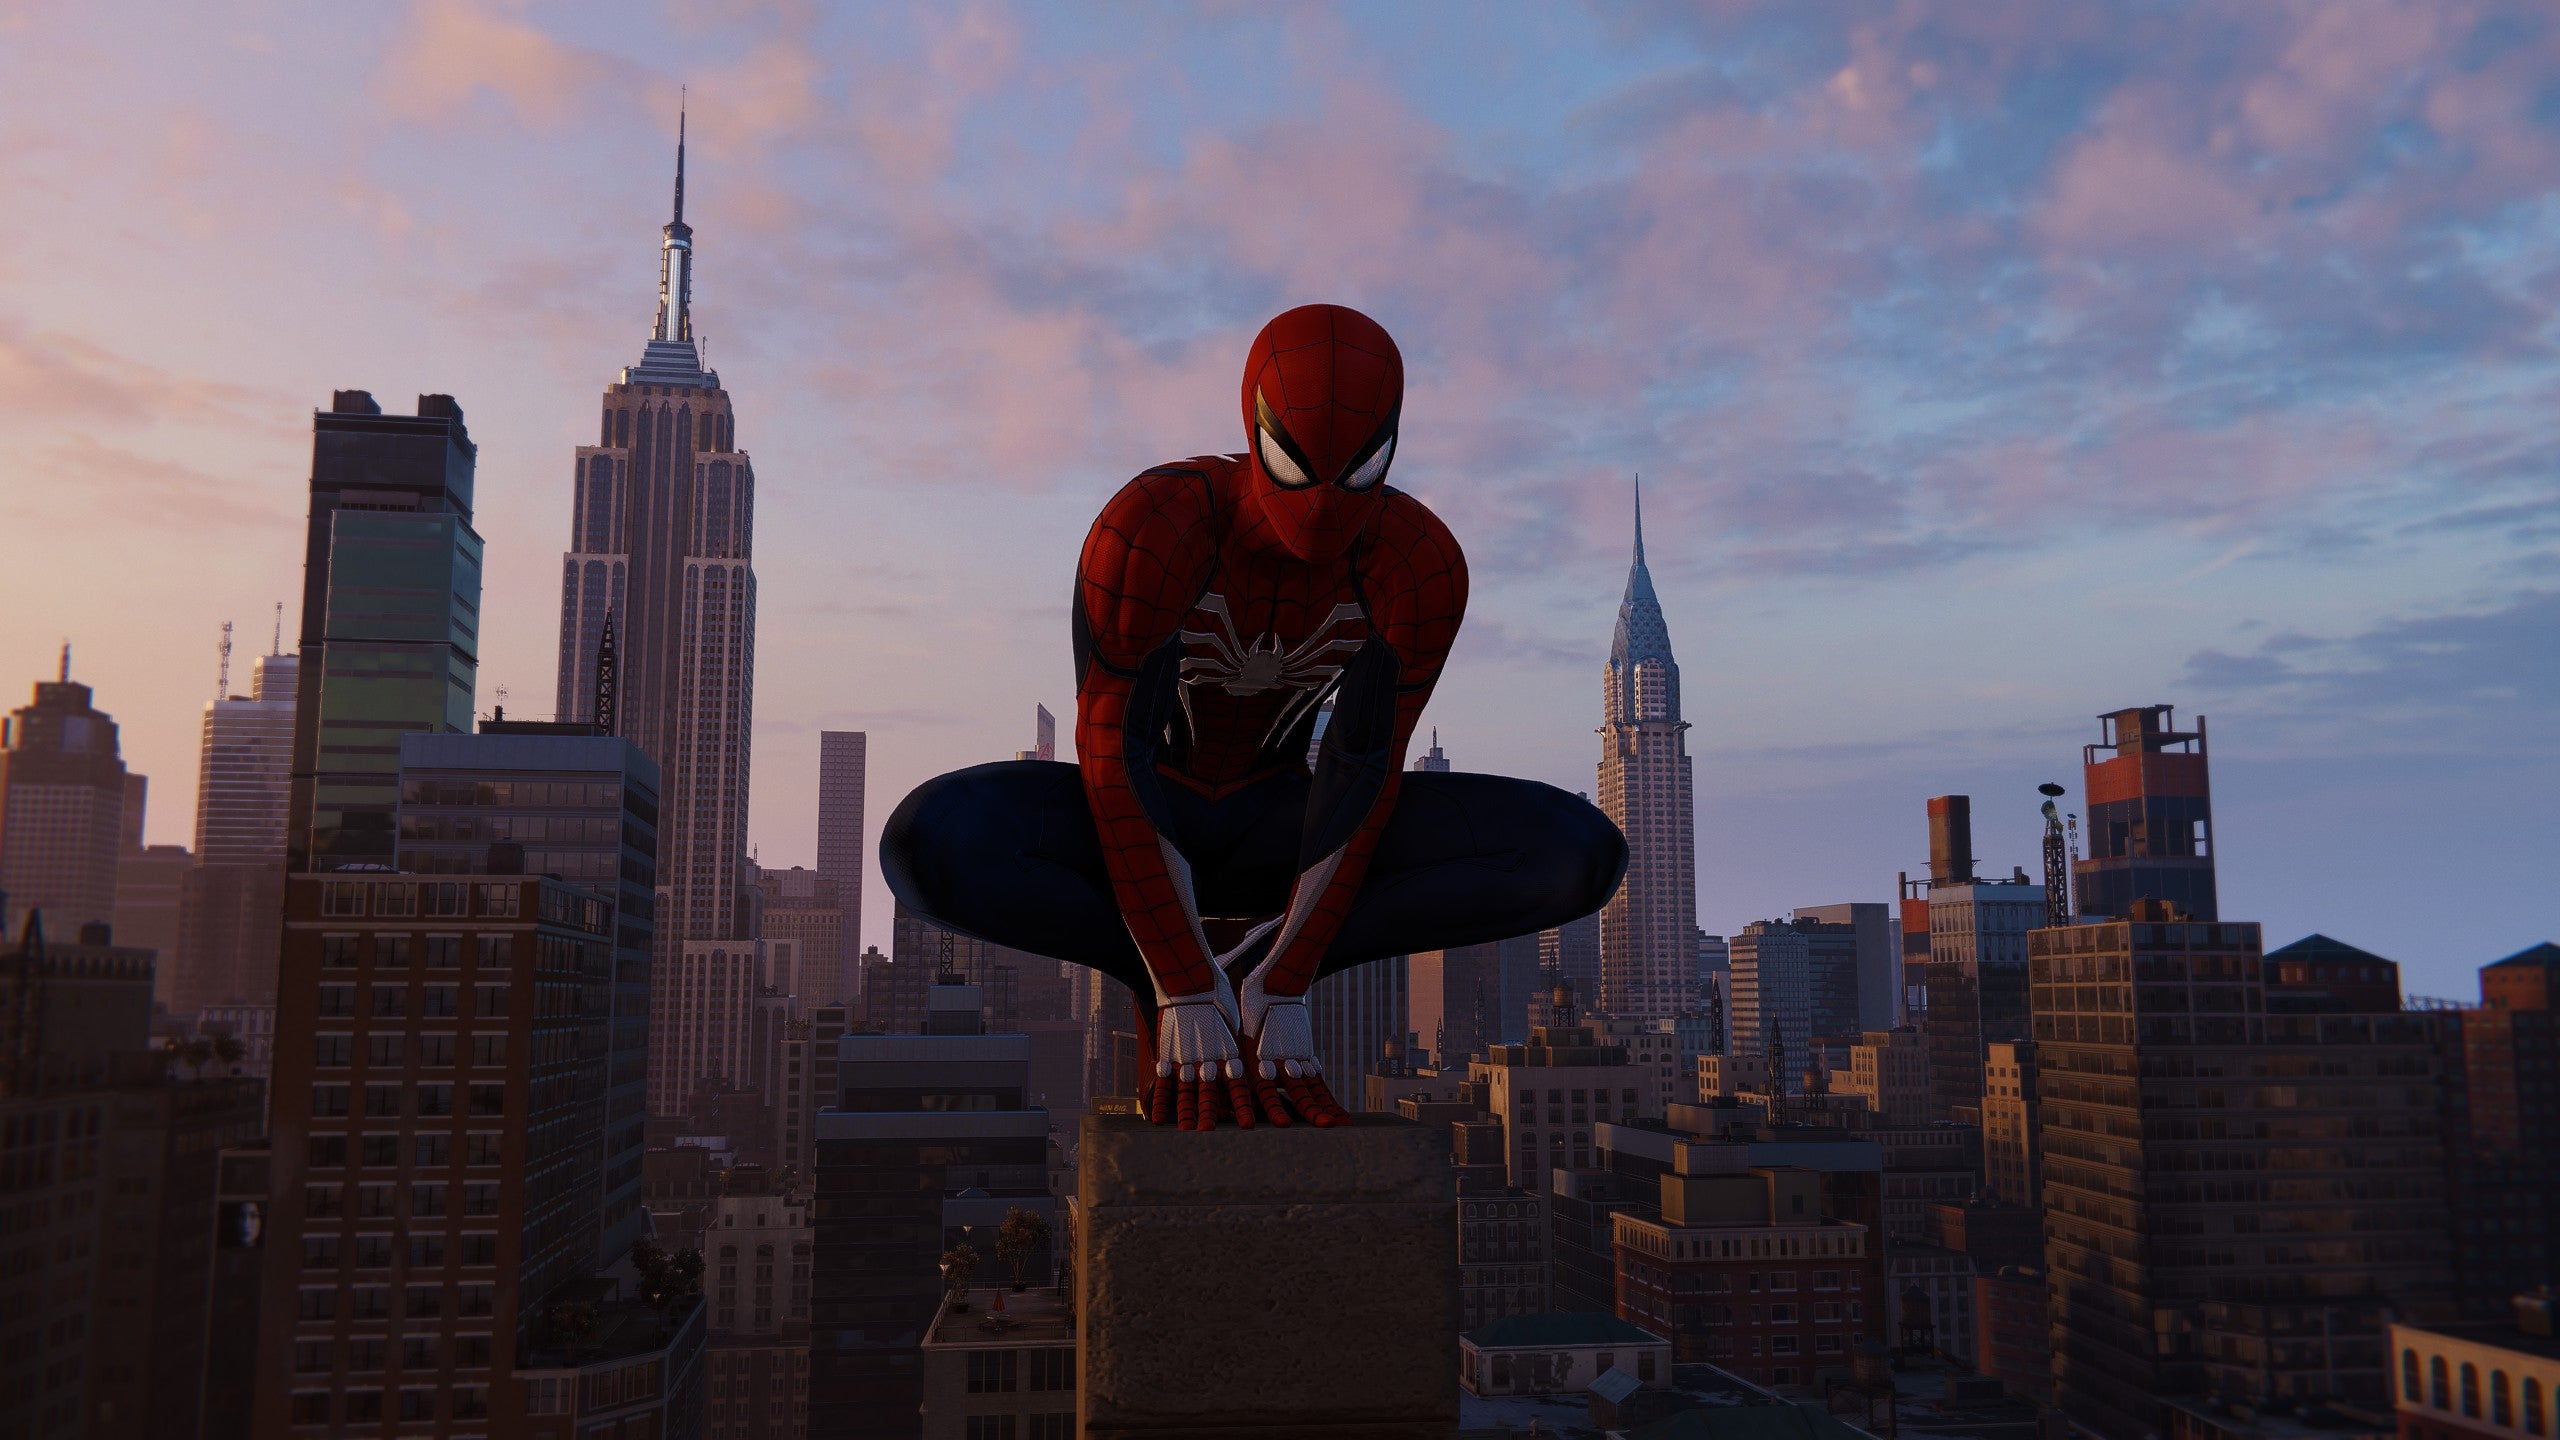 Spider-Man perches atop a building, New York skyline in the background, in Marvel's Spider-Man Remastered.